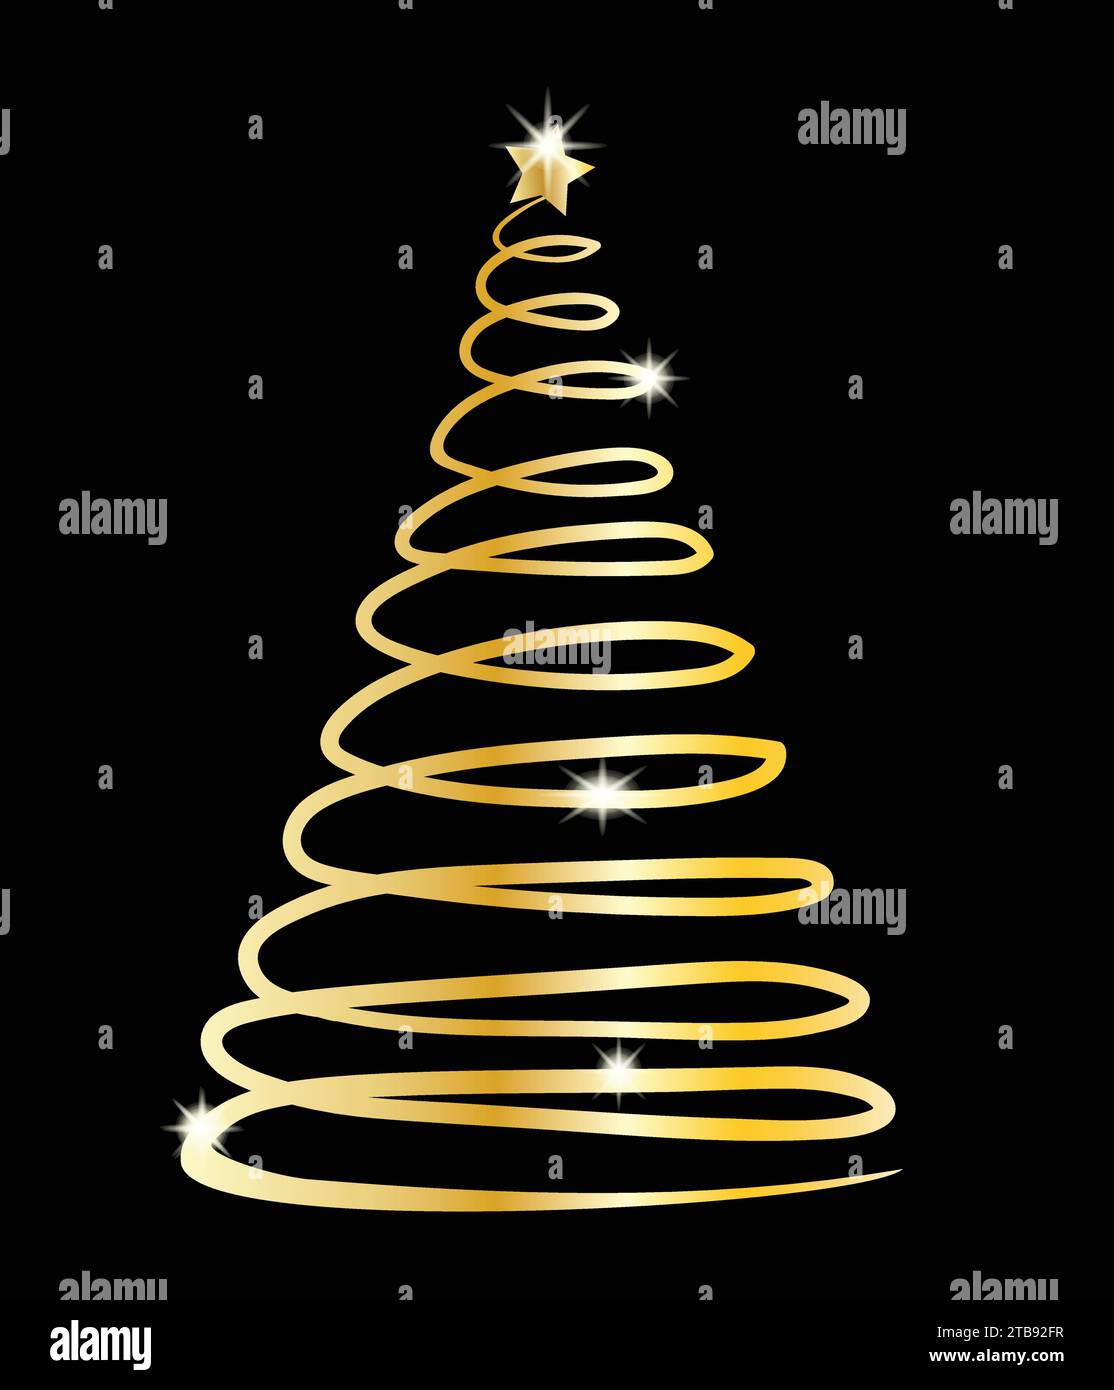 Golden Christmas tree sparkle gold tree for decoration, banners, flyers, greeting cards, modern line art tree Stock Vector